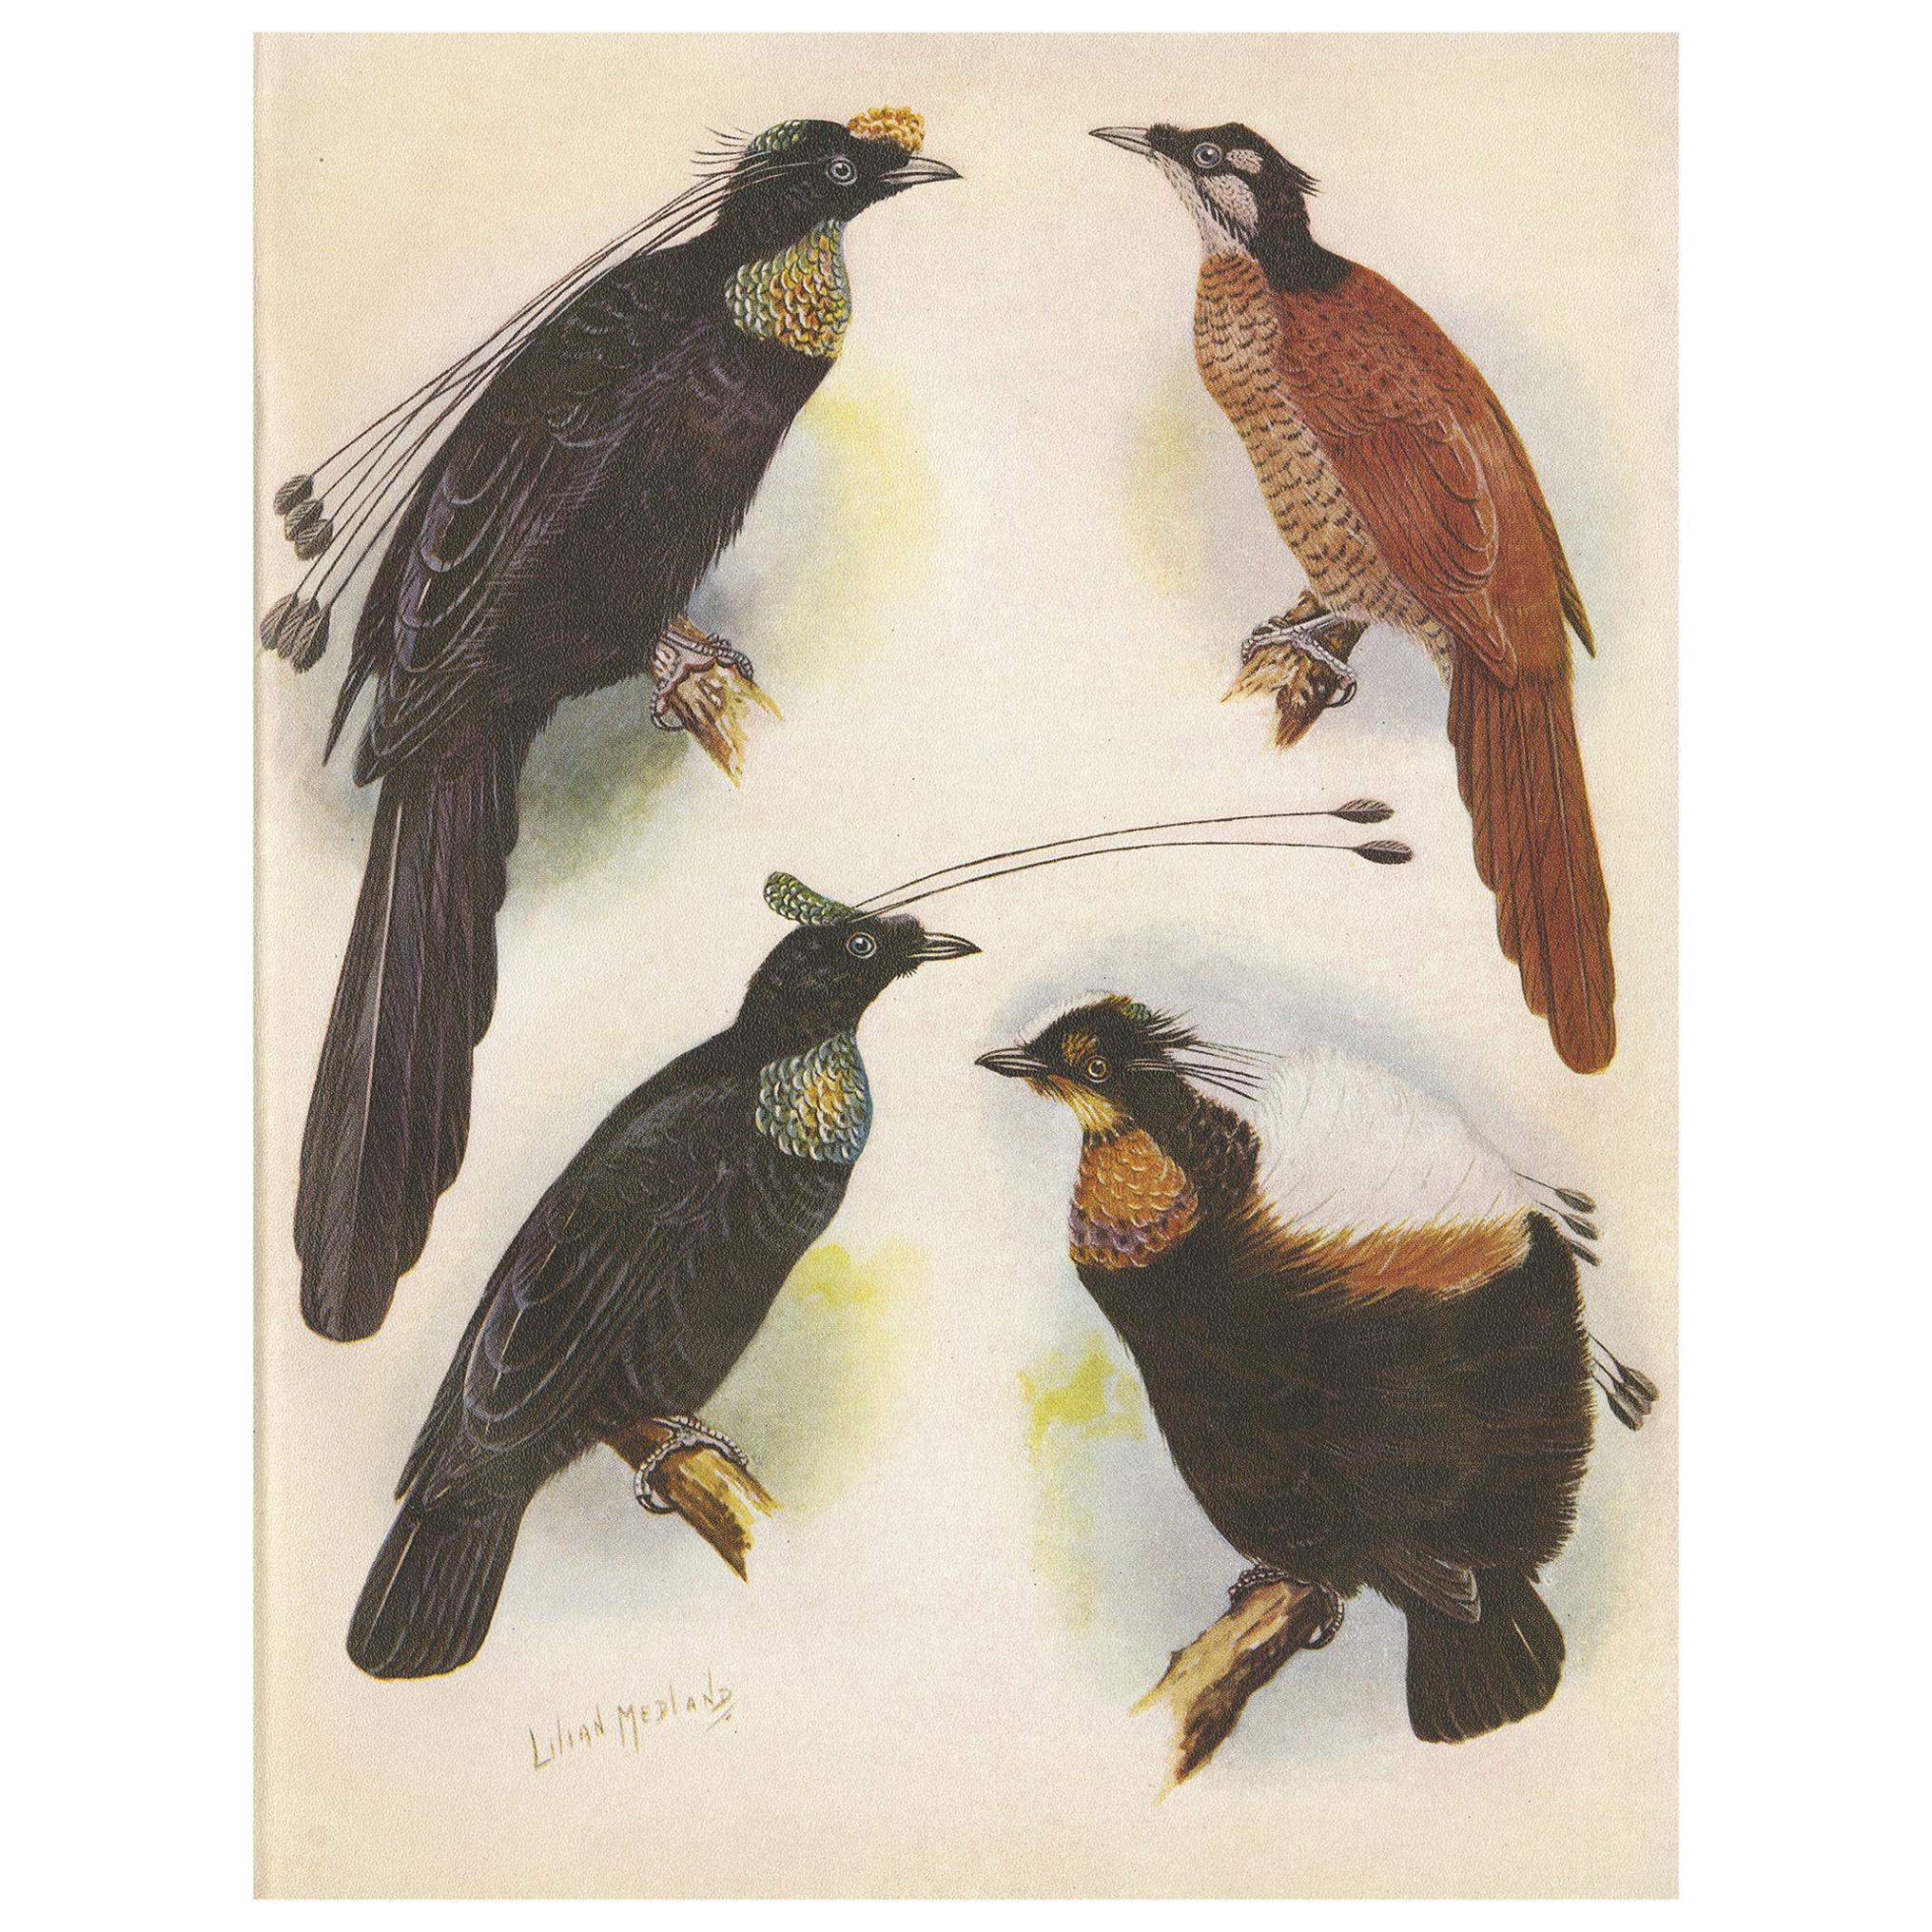 Antique Print of the Wahnes' Six-Plumed Bird of Paradise and Others, 1950